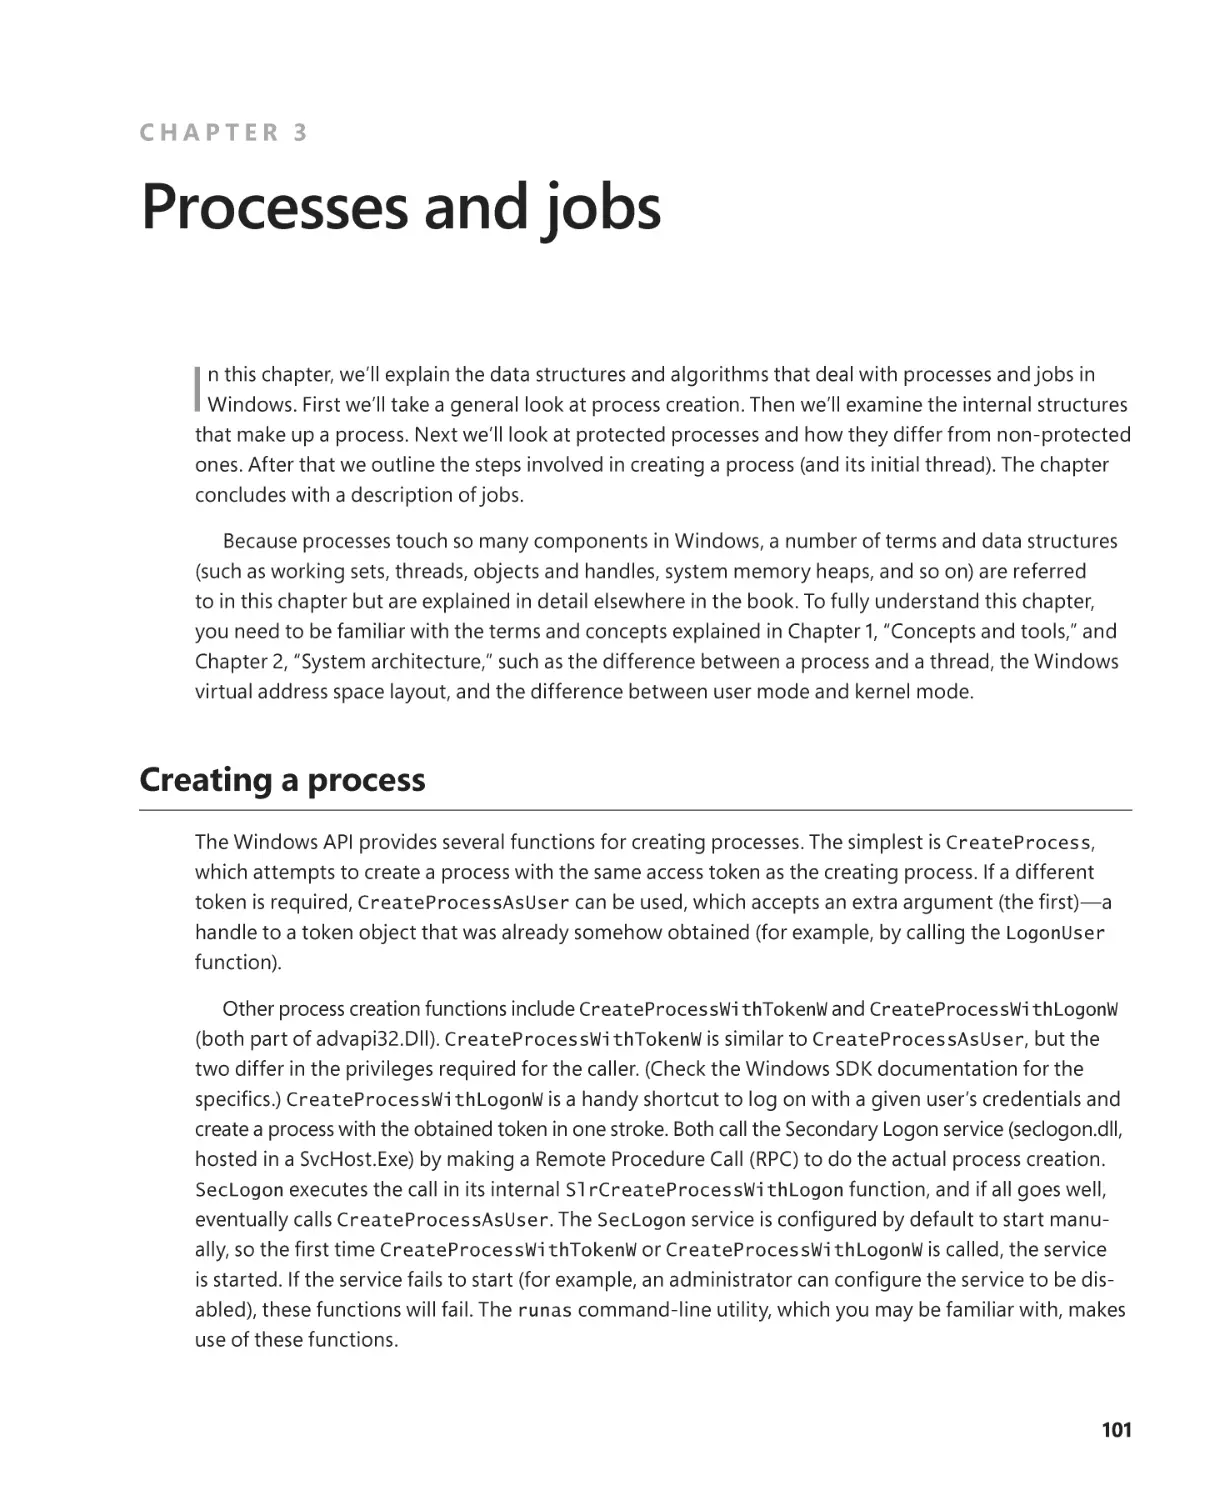 Chapter 3 Processes and jobs
Creating a process